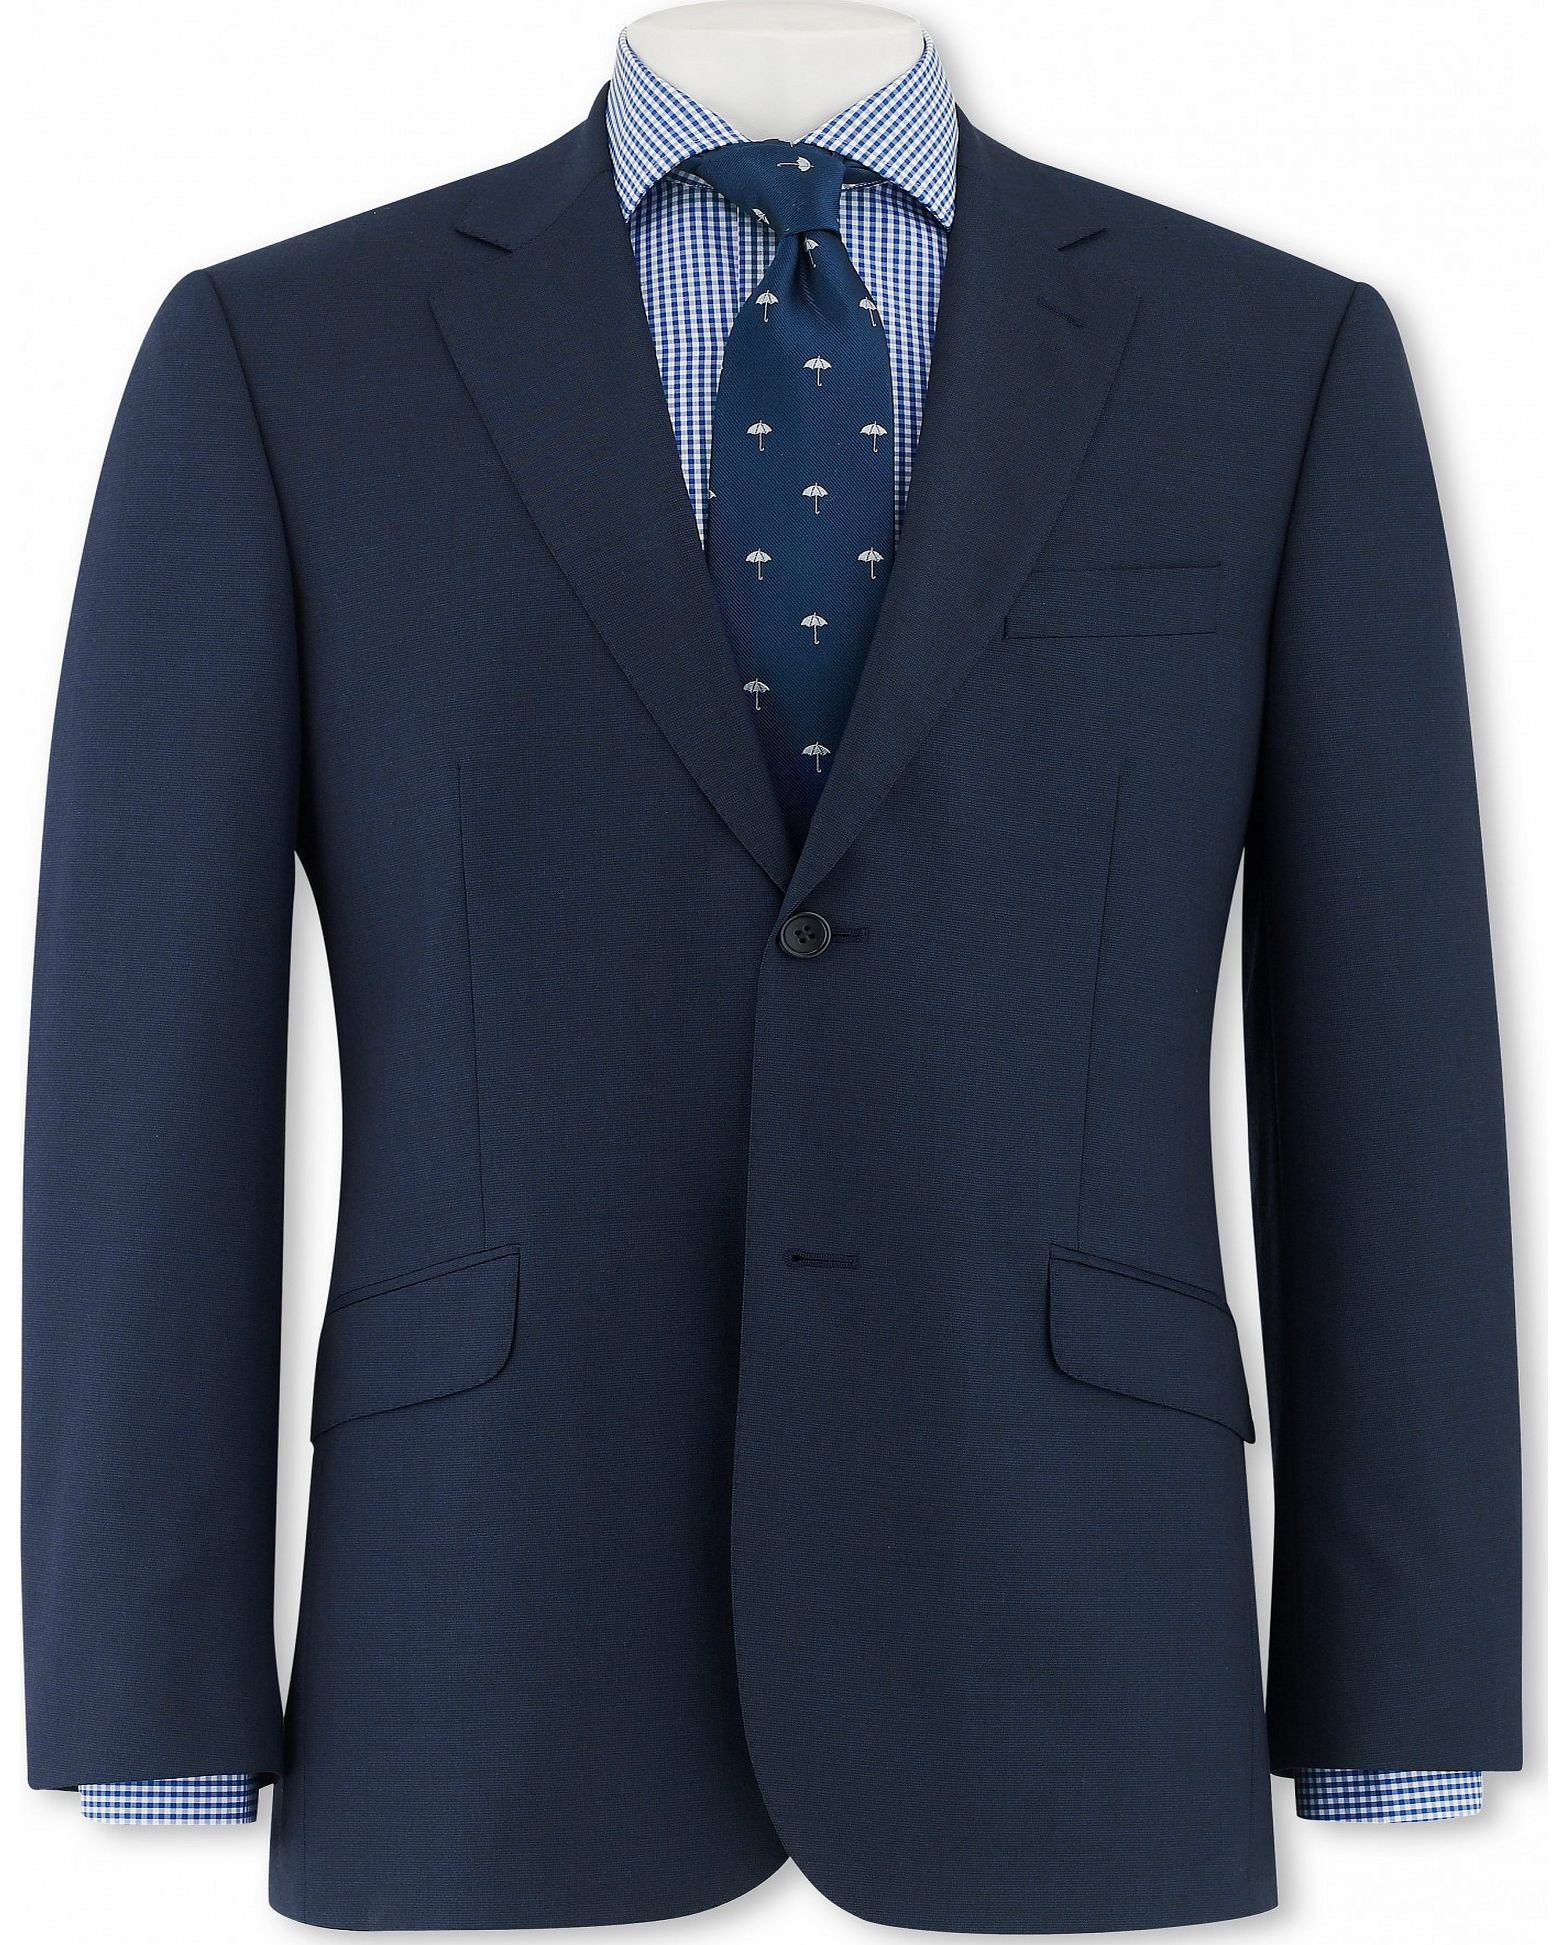 Navy Microdot Suit Jacket 42`` Long